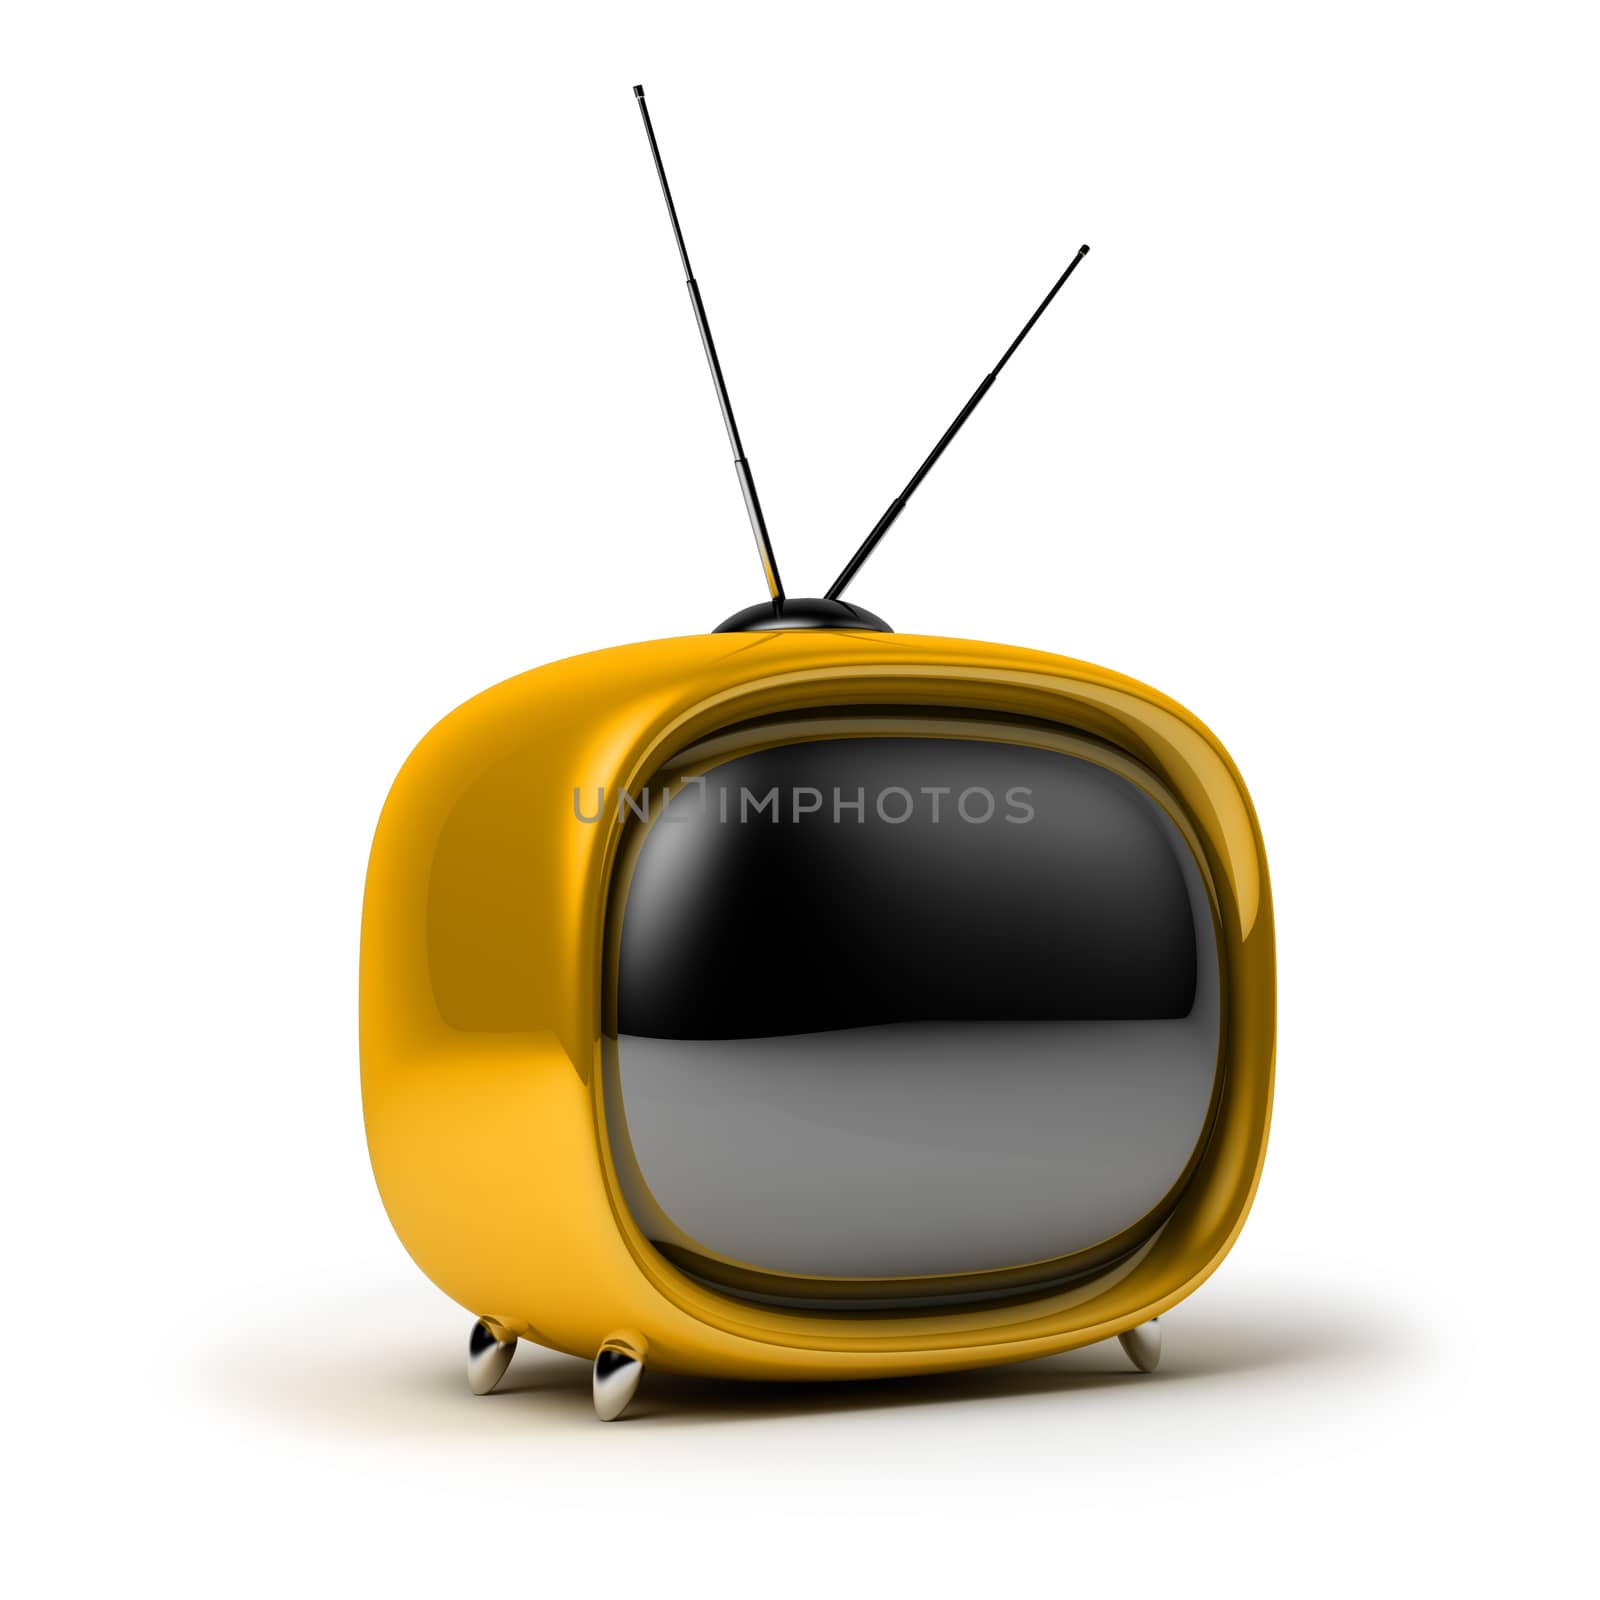 Yellow a retro the TV. 3d image. Isolated white background.